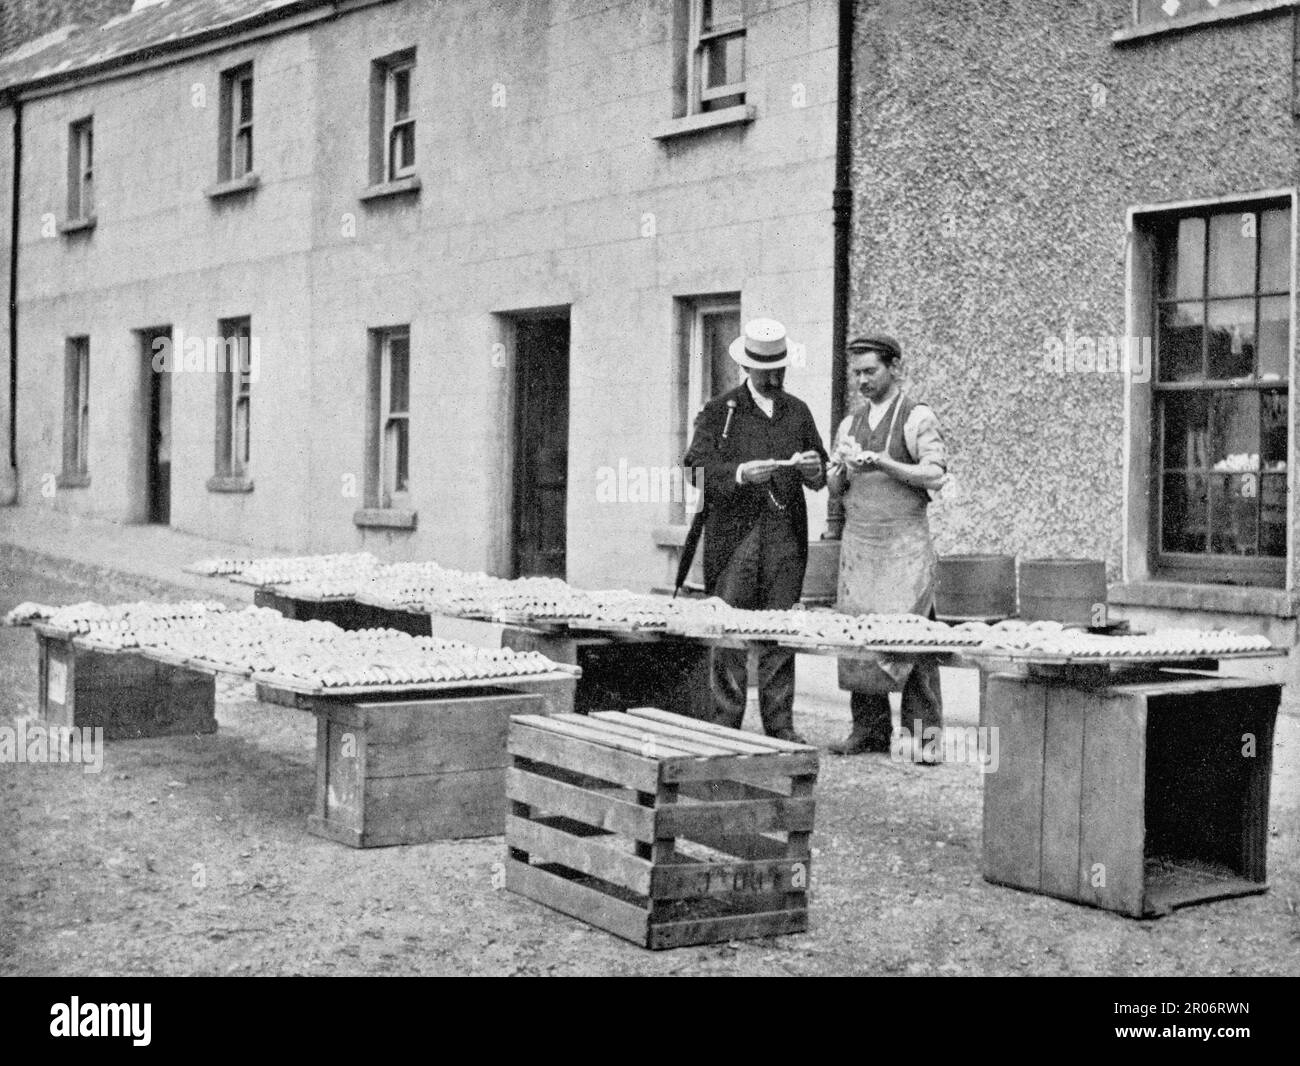 A late 19th century street scene in Drogheda, County Louth, Ireland in which a maker of clay pipes, called in Irish 'dudeen', chats to a potential customer. Stock Photo